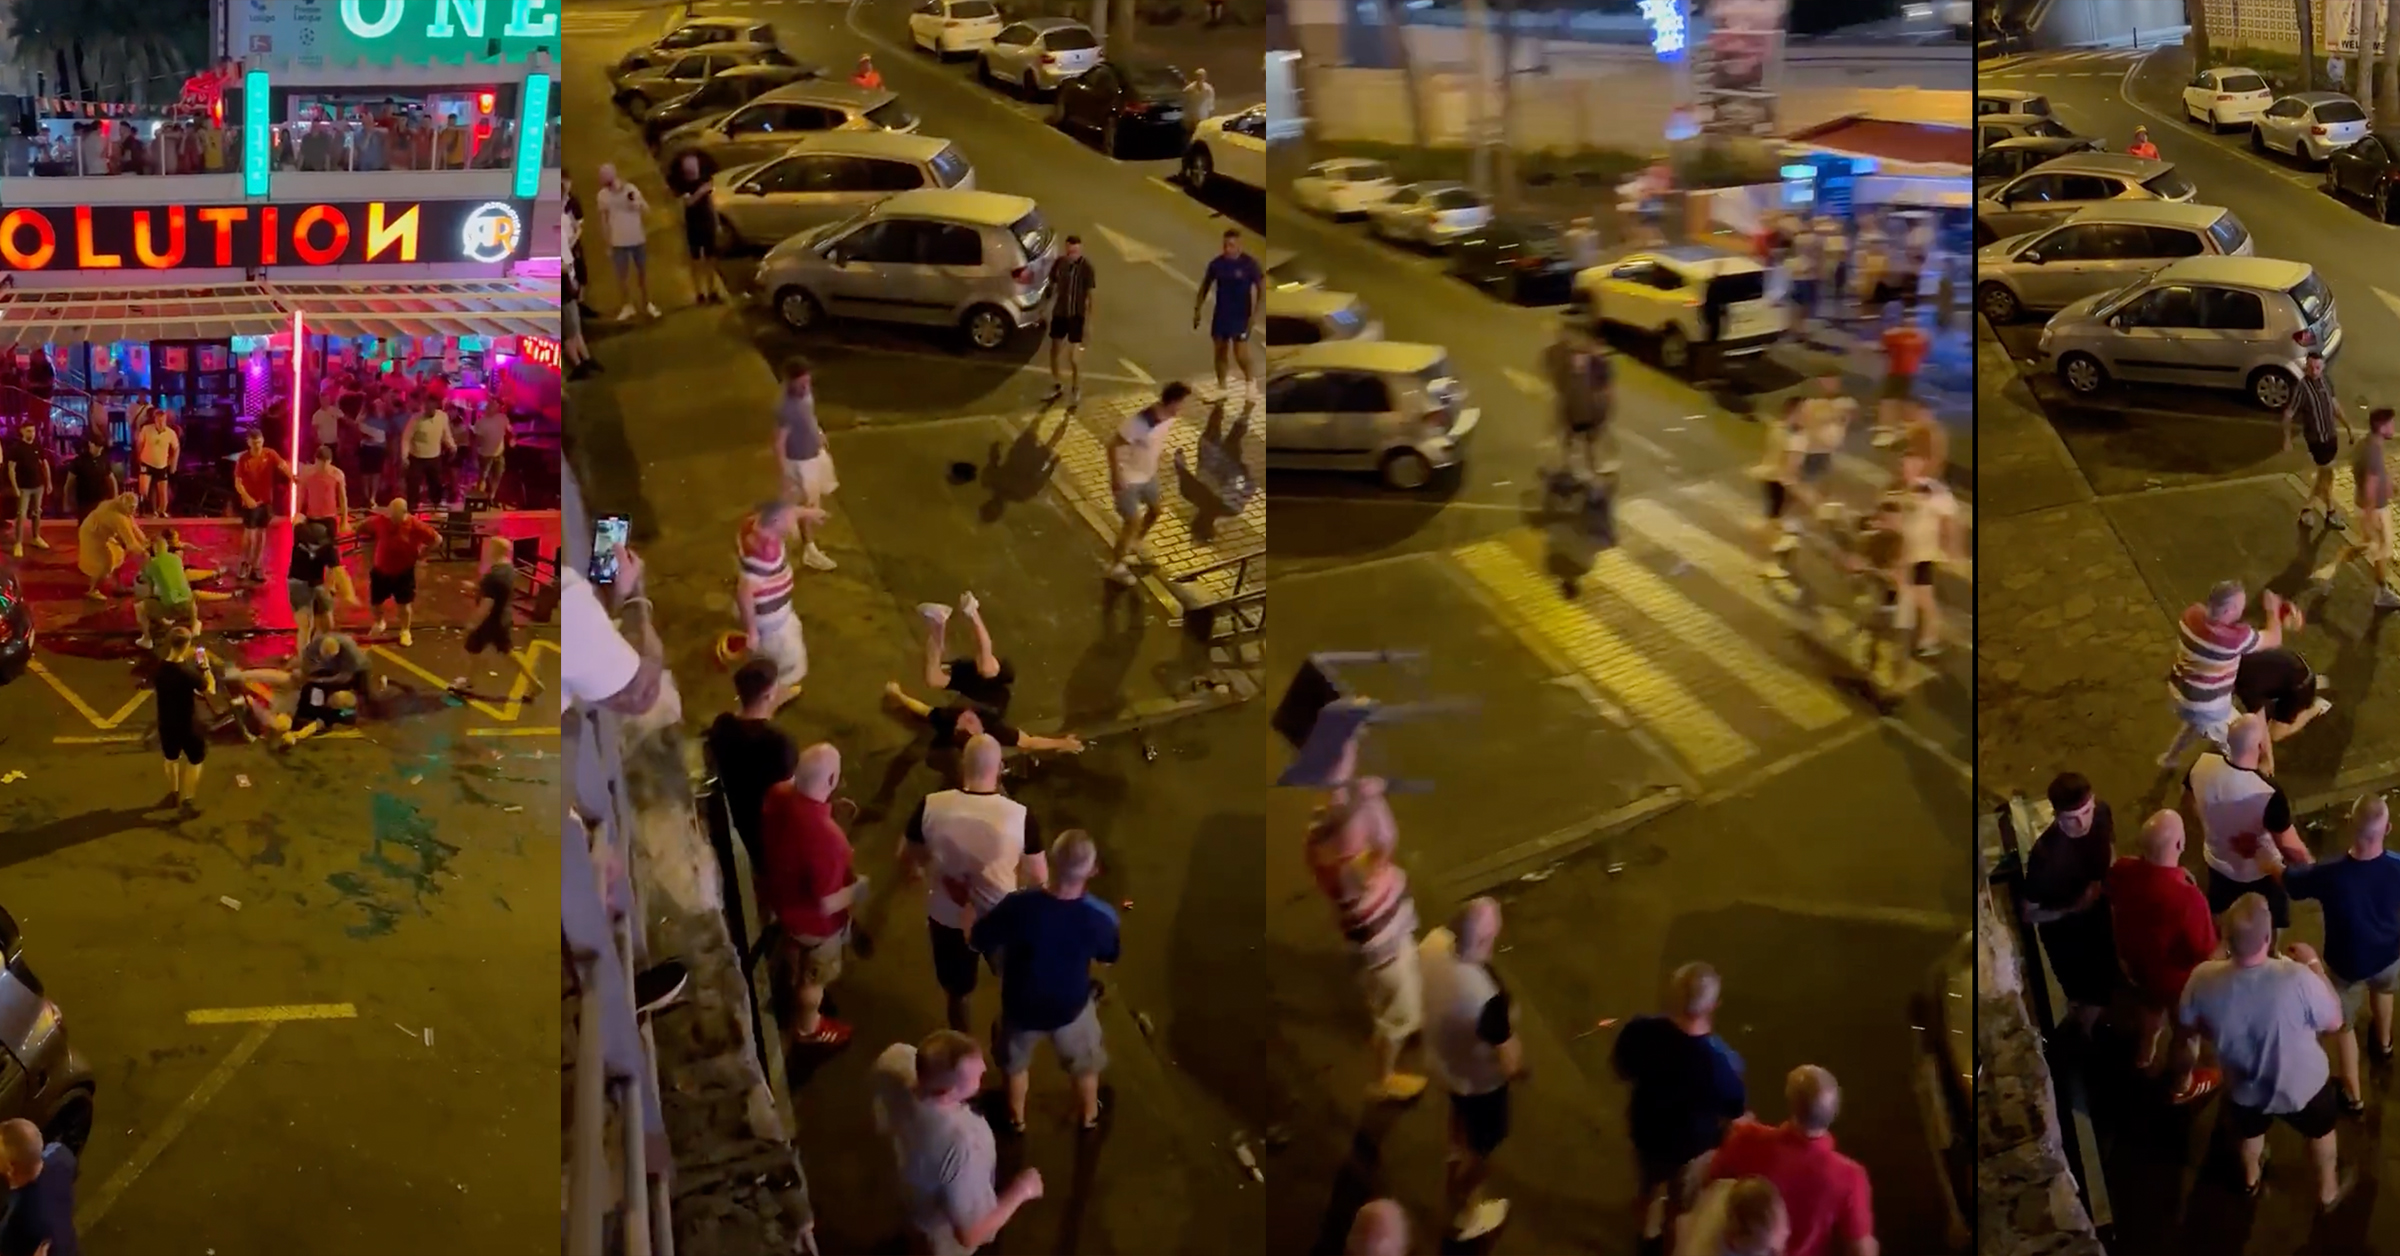 England and Wales fans violently clash in Tenerife